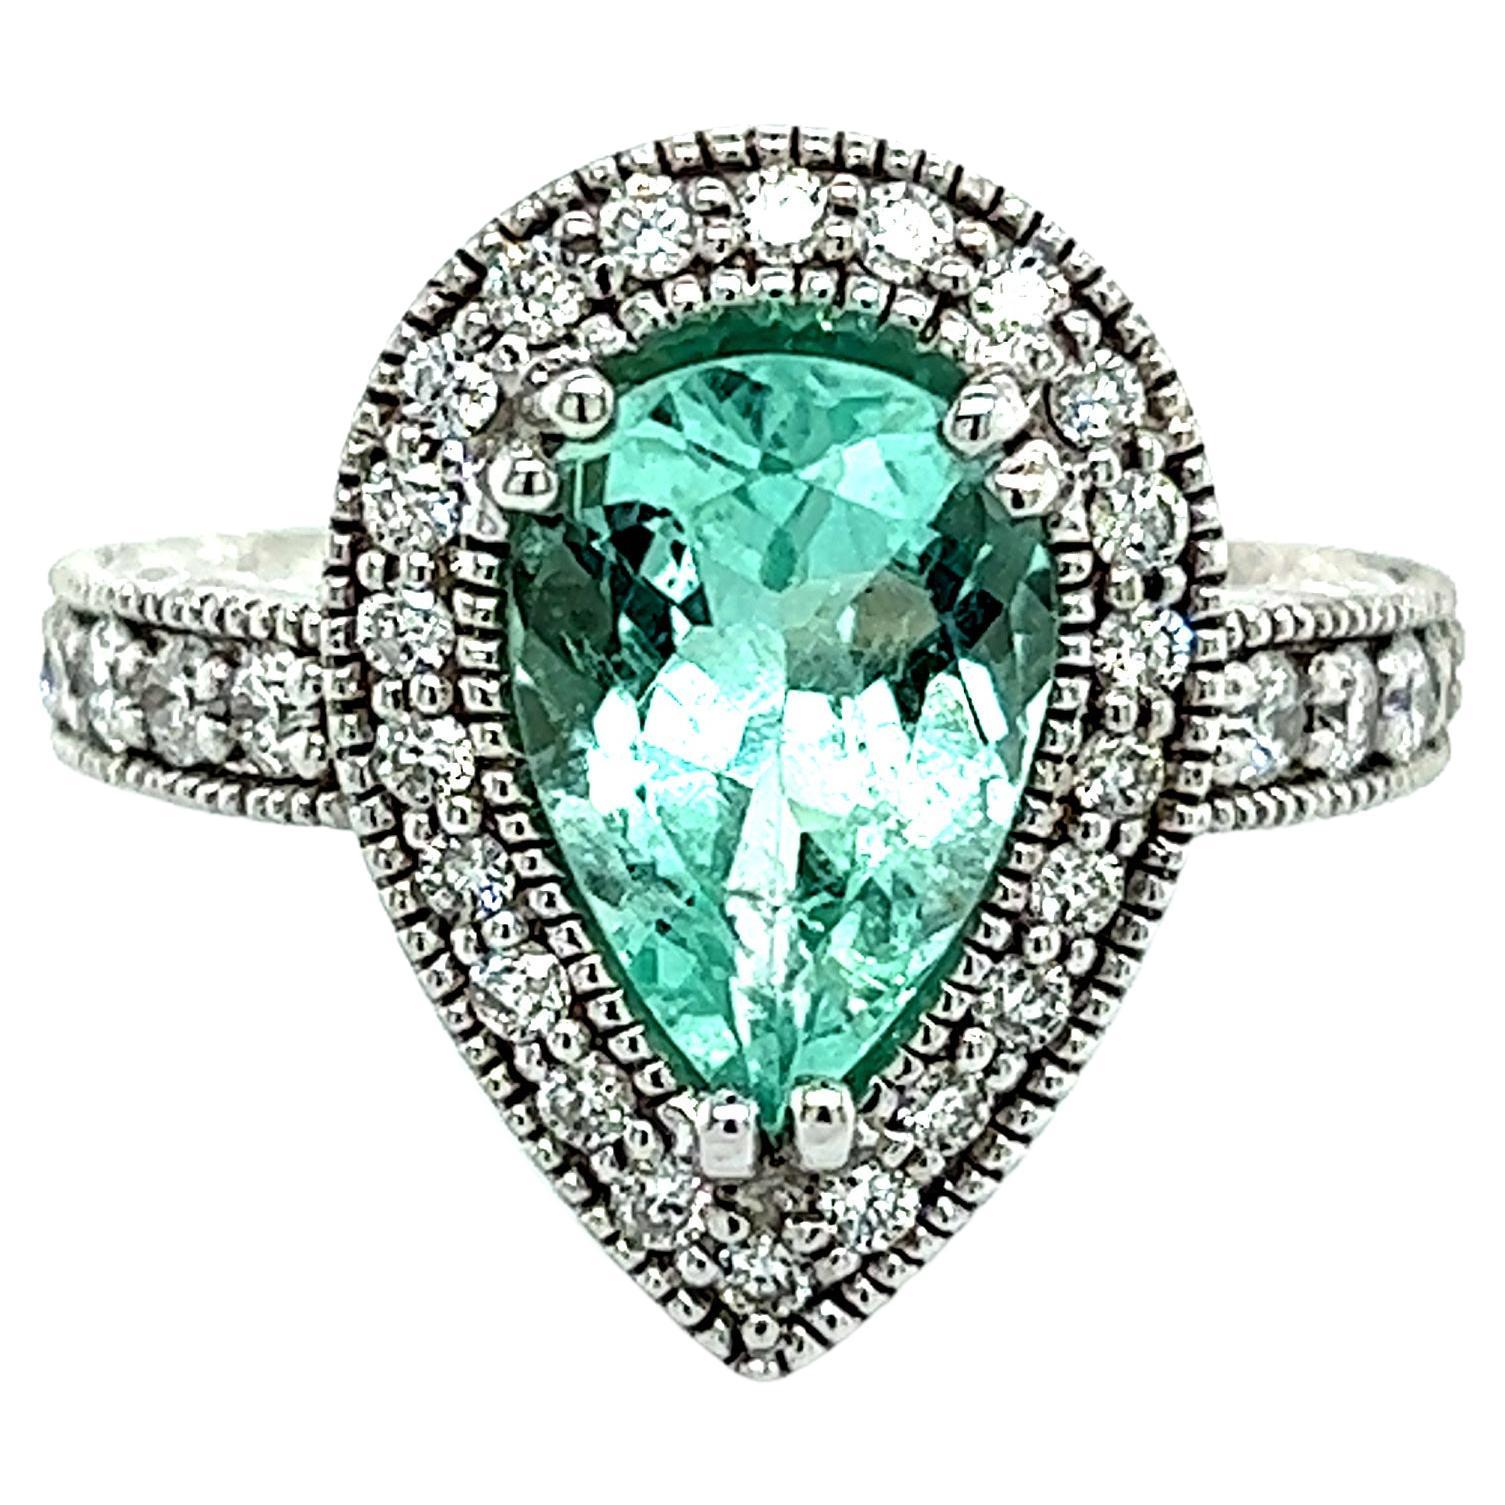 Natural Emerald Diamond Ring Size 6.5 14k W Gold 3.27 TCW Certified 